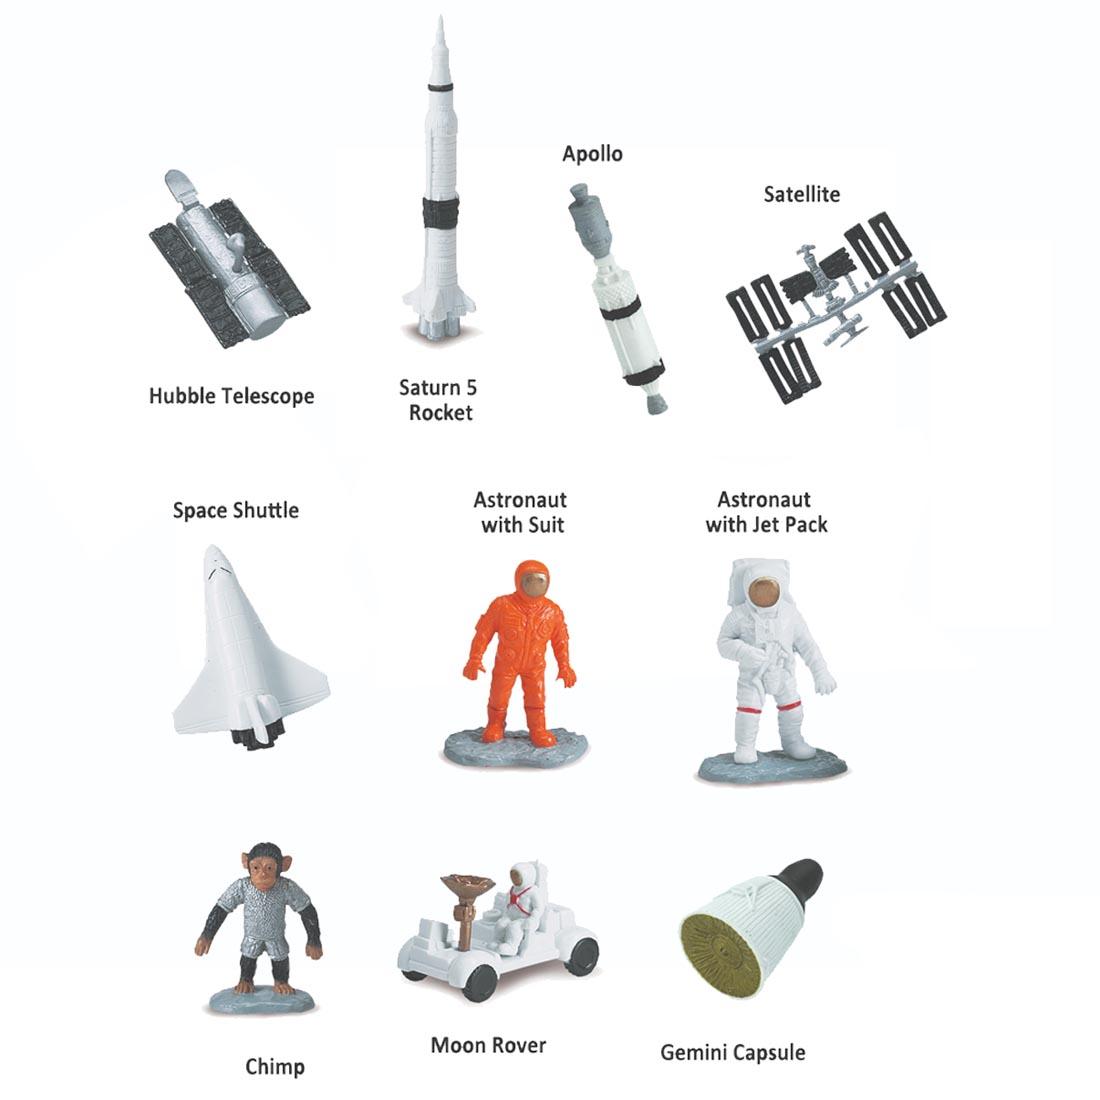 10 pieces from the Space Figurine Set labeled with their names: hubble telescope, Saturn 5 Rocket, Apollo, satellite, space shuttle, 2 astronauts, chimp, moon rover, Gemini capsule